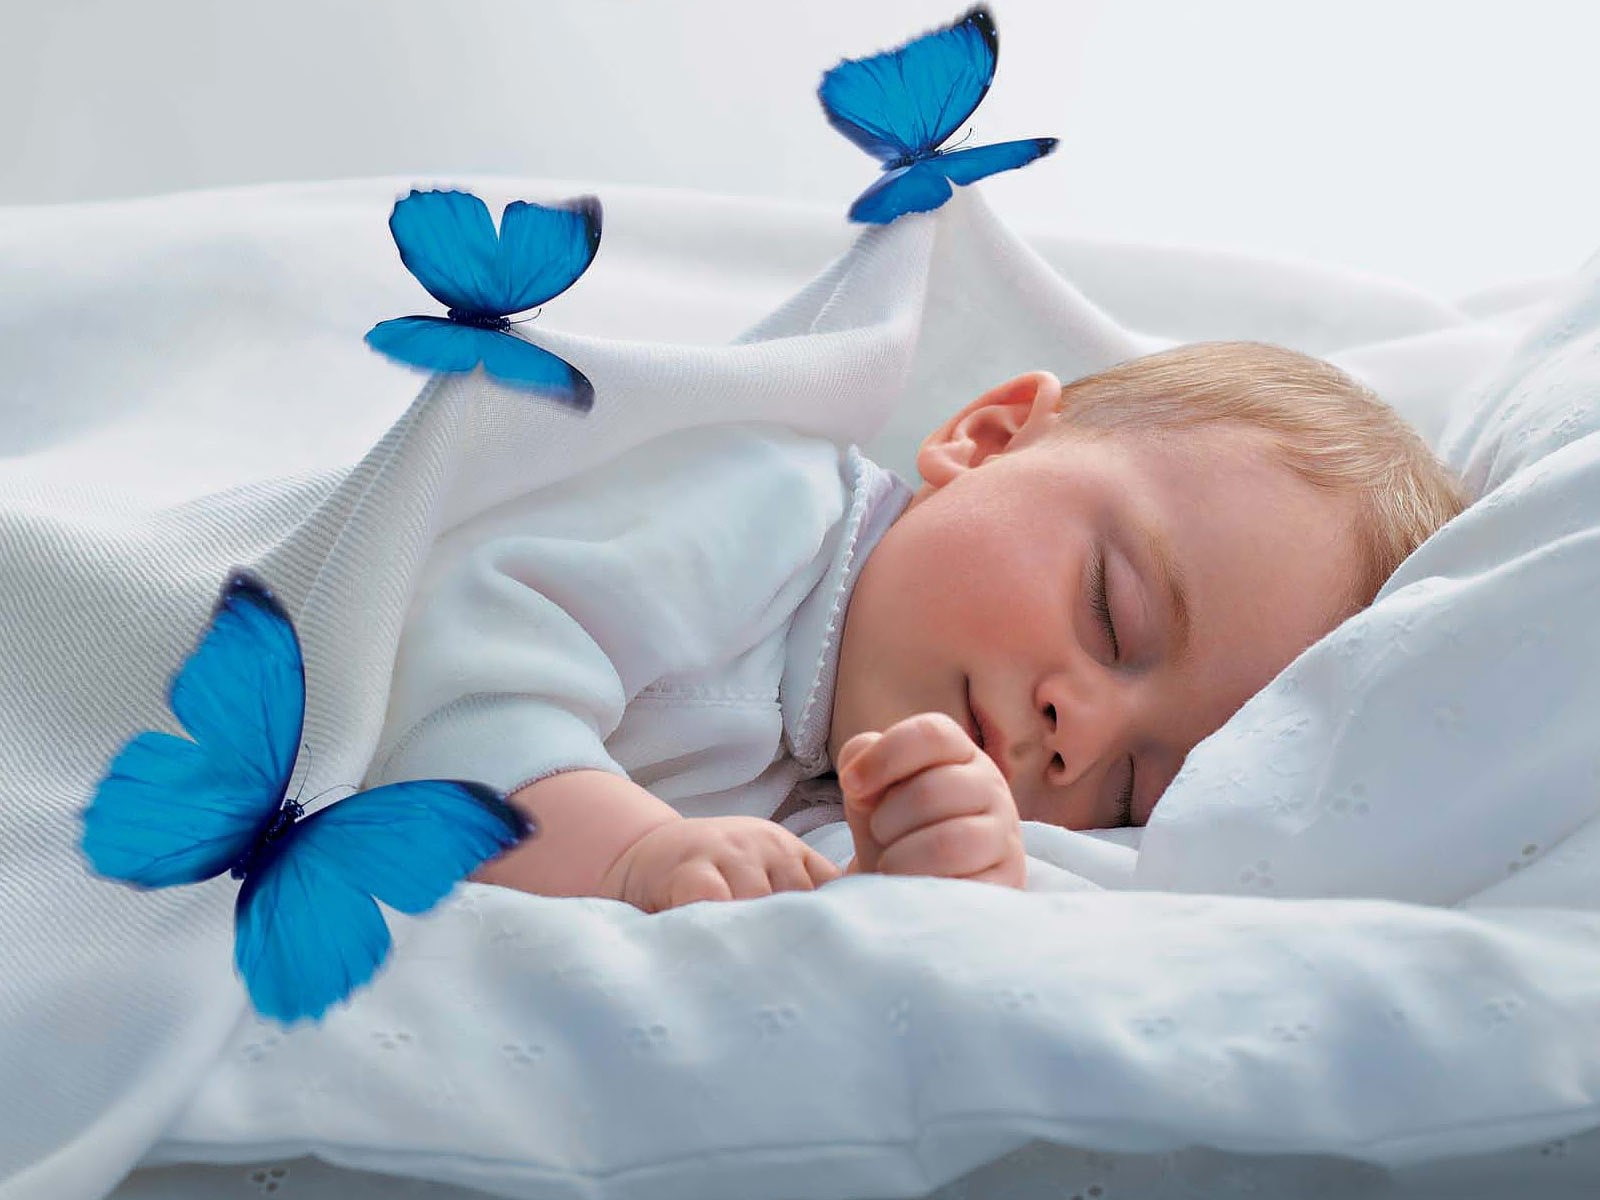 Child, Baby, Sleep, Dream, Butterfly, Angel, Sweet, one person